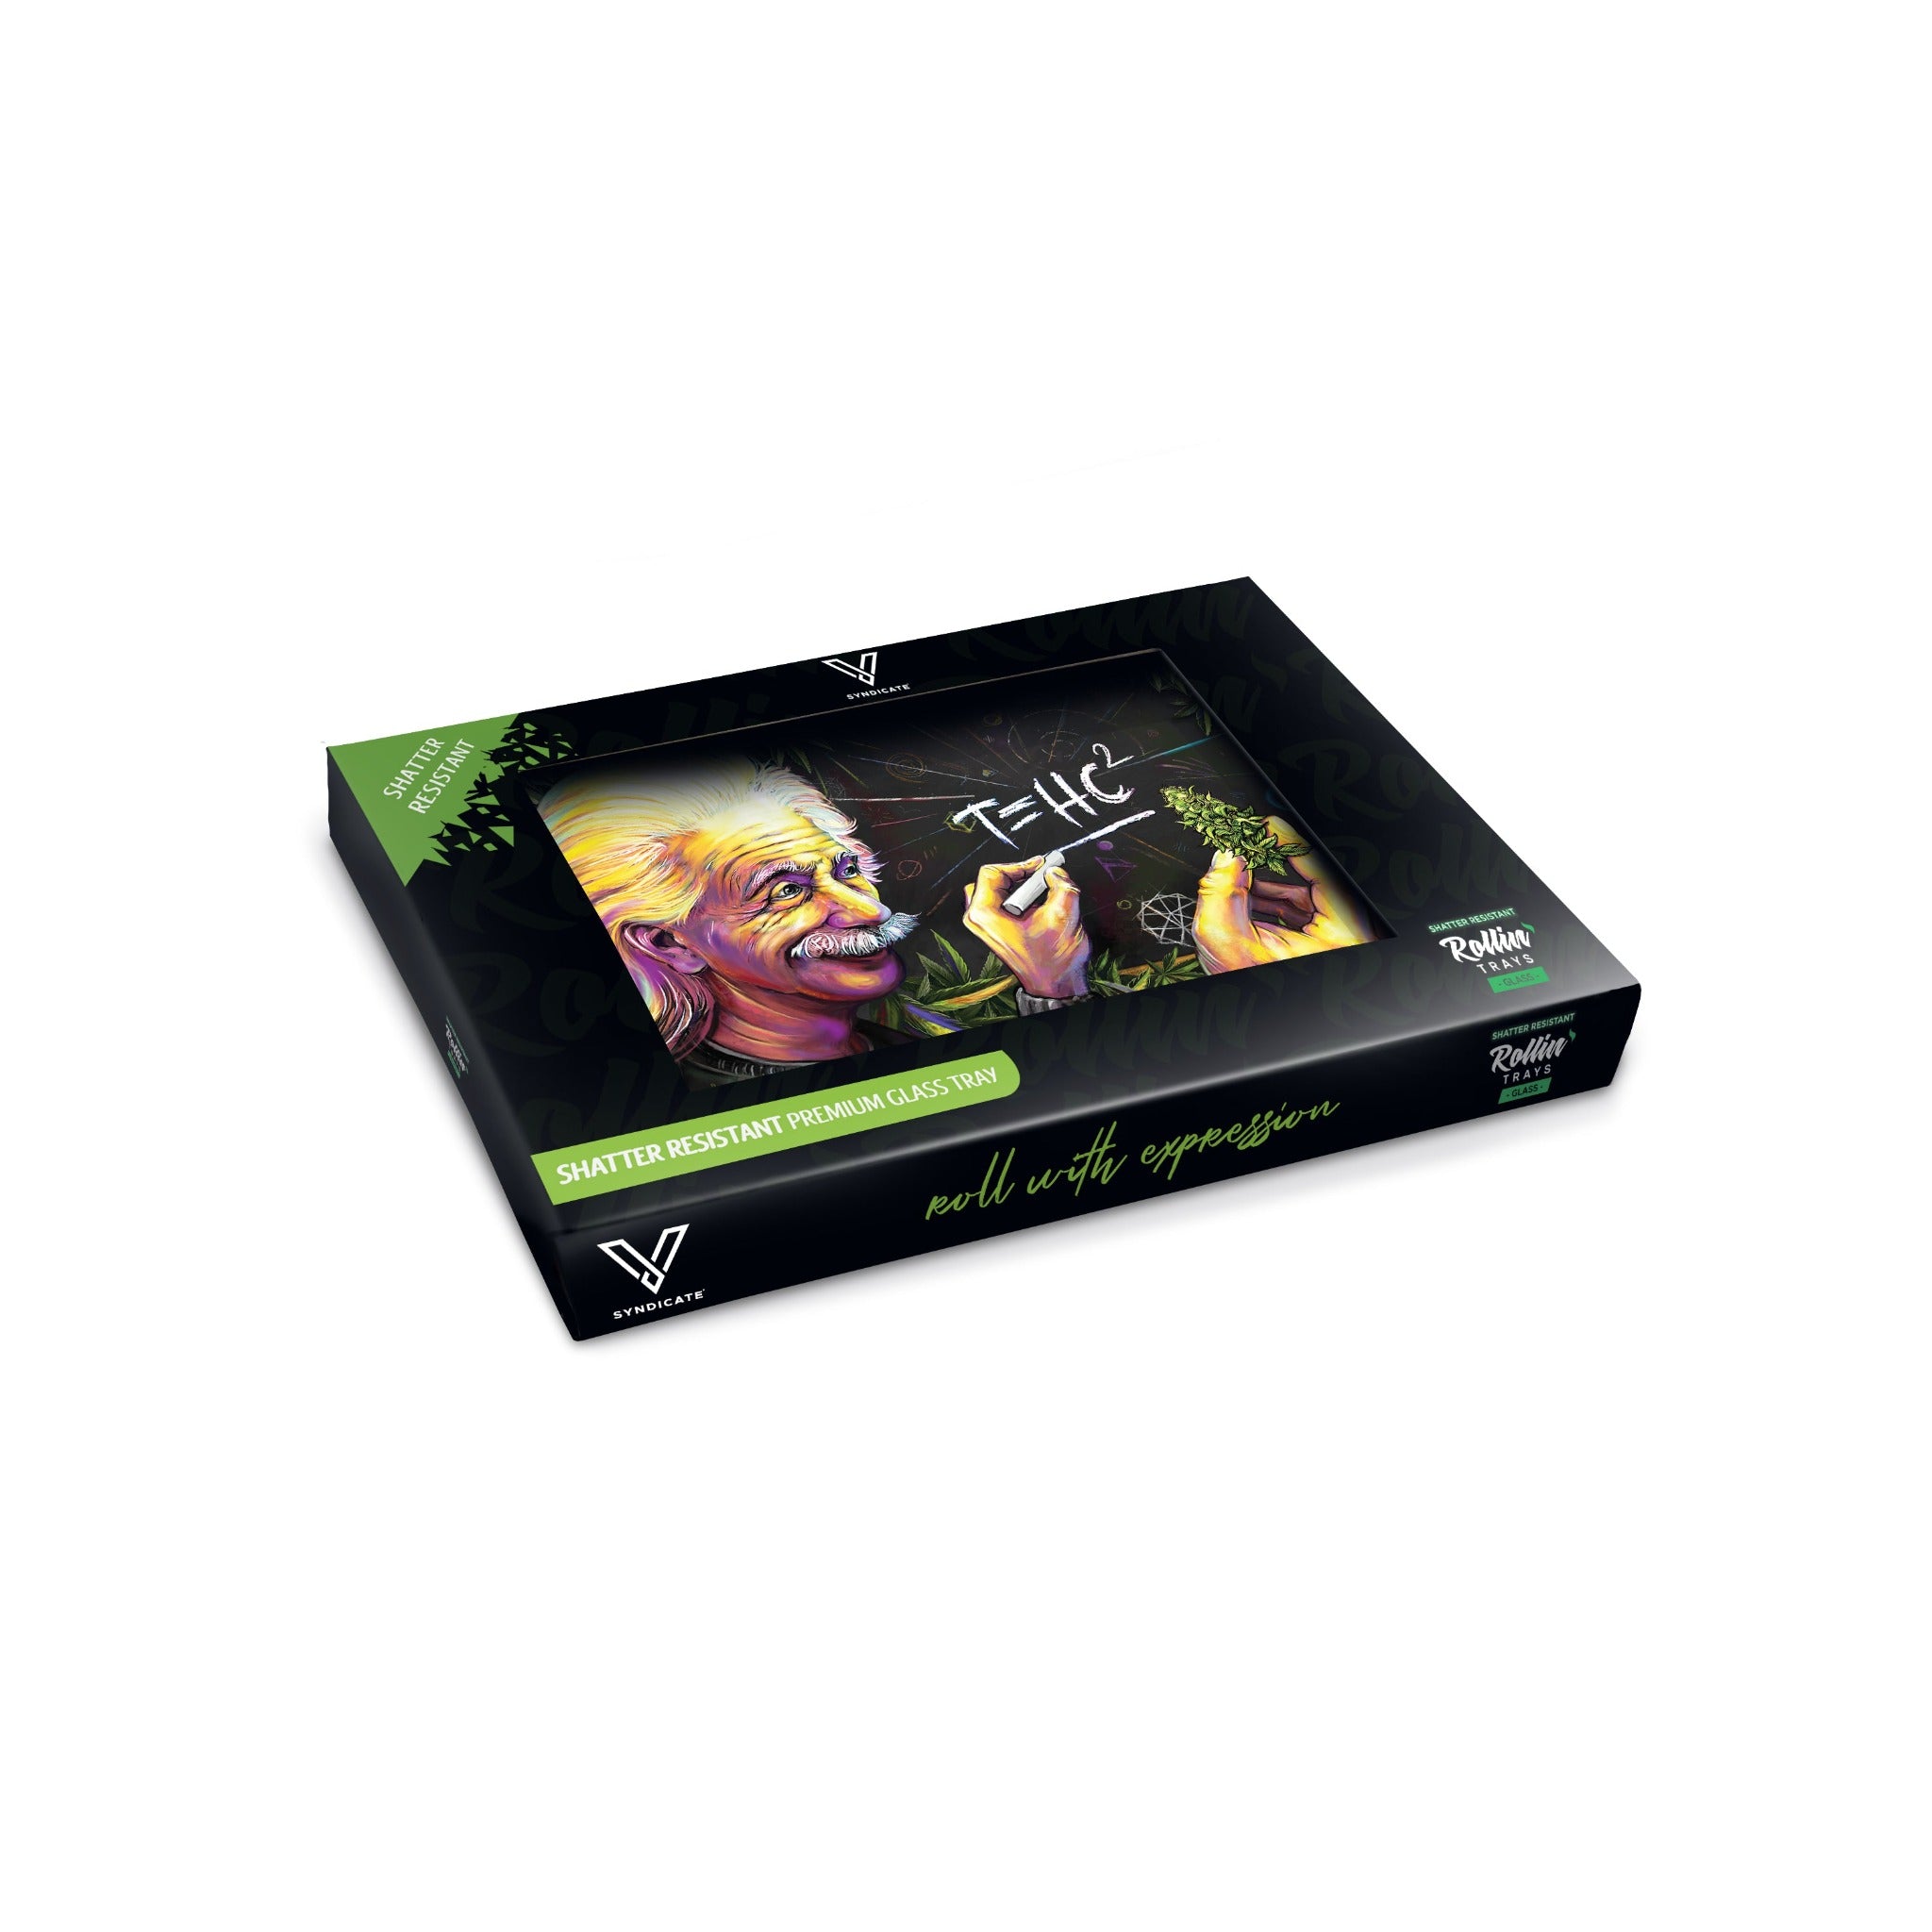 V Syndicate T=HC2 Glass Rolling Tray Rolling Tray VS Small Higher Education 